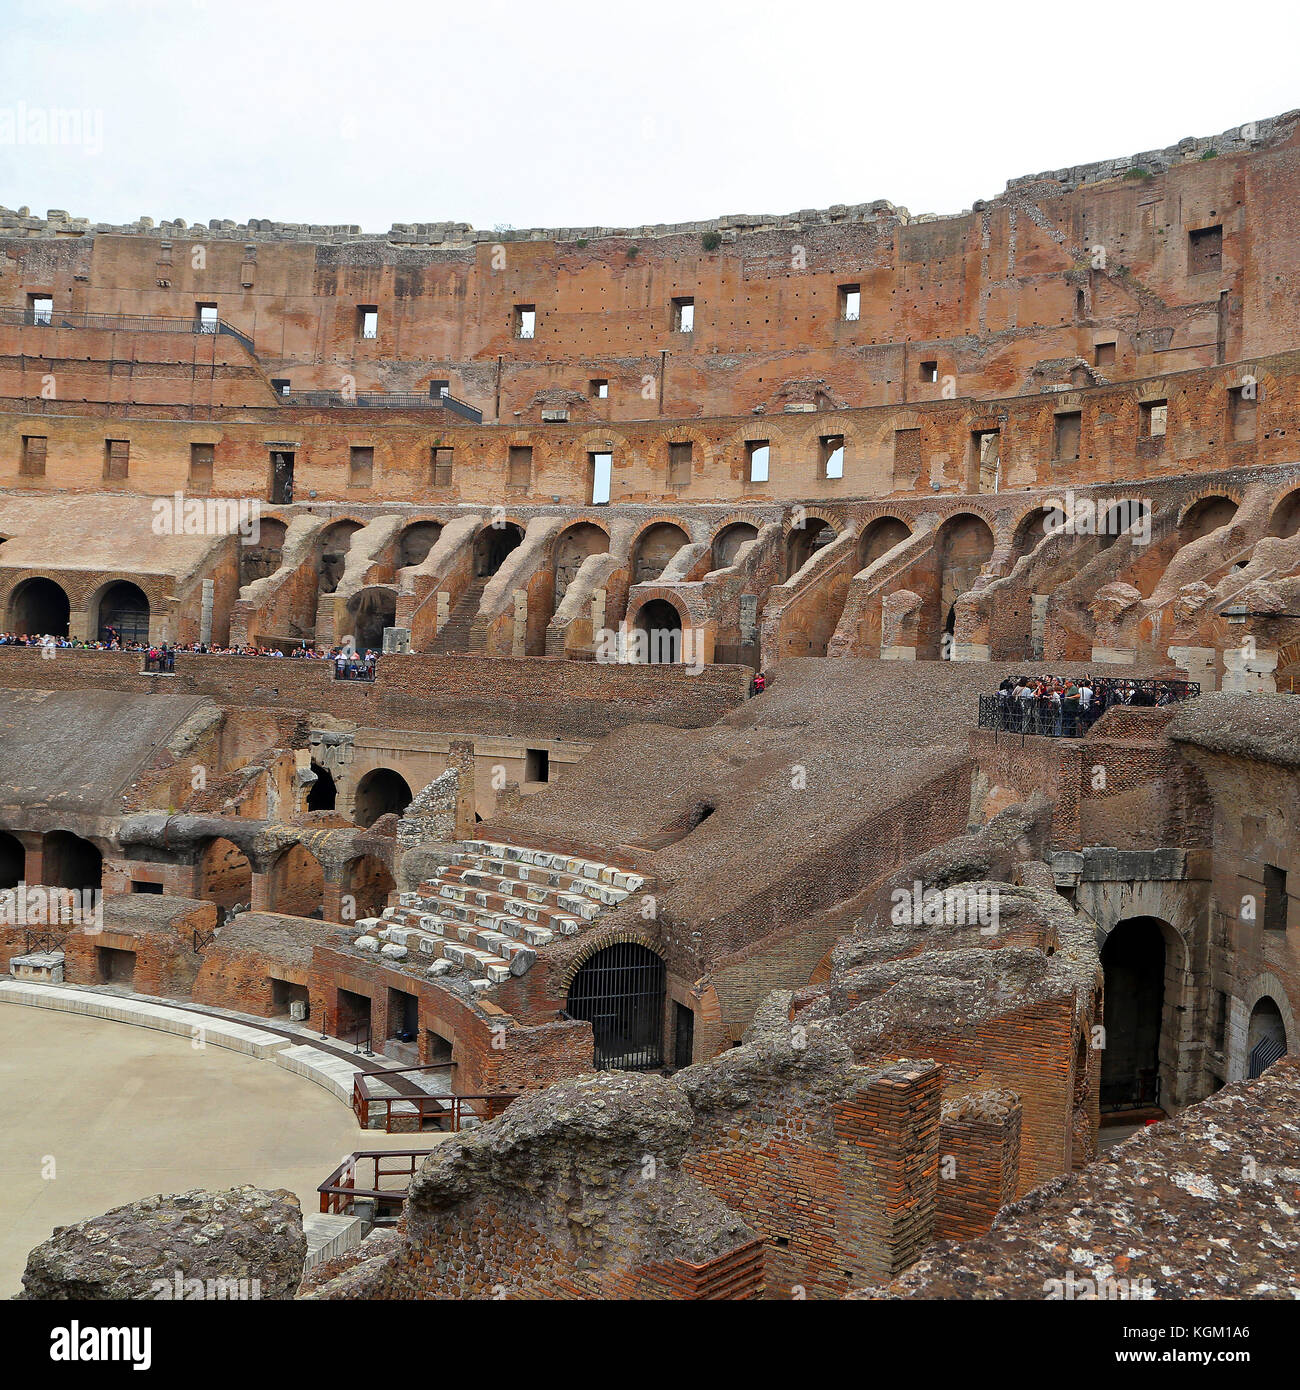 ROMA, ITALY - 01 OCTOBER 2017: Colosseum, Coliseum or Coloseo, Flavian Amphitheatre largest ever built symbol of ancient Roma city in Roman Empire. Stock Photo